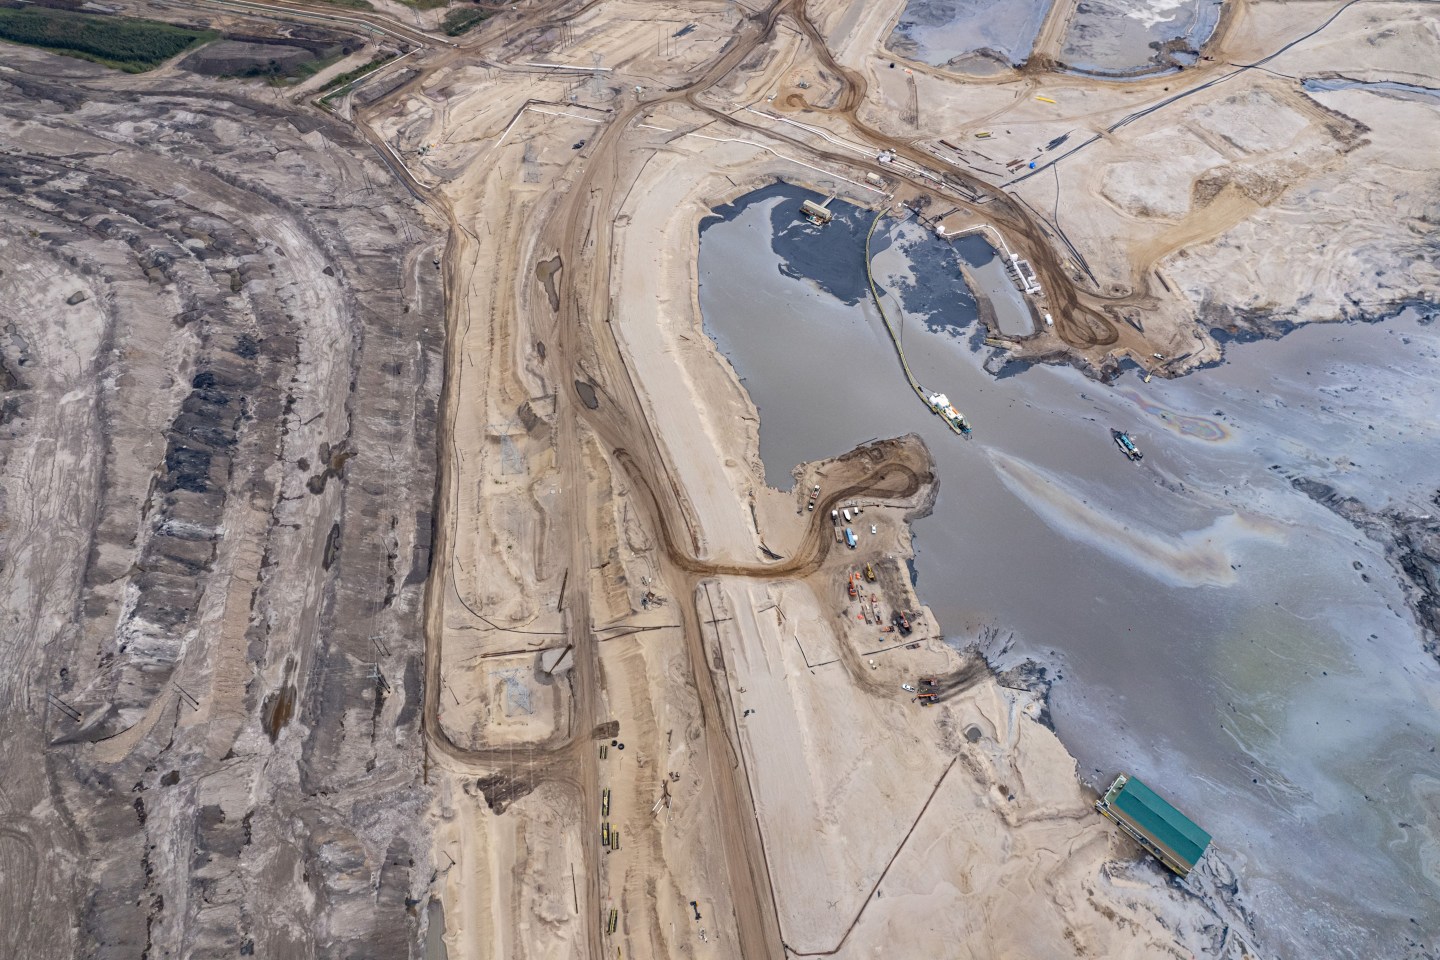 A general view shows an oil sands mining operation and facility near Fort McKay, Alberta, on September 7, 2022. &#8211; At Fort McKay near Fort McMurray in western Canada, in the heart of the country&#8217;s boreal forest, the pines and the people were long ago cleared out to make way for huge open-pit mines dedicated to excavation of oil sands. (Photo by Ed JONES / AFP) (Photo by ED JONES/AFP via Getty Images)